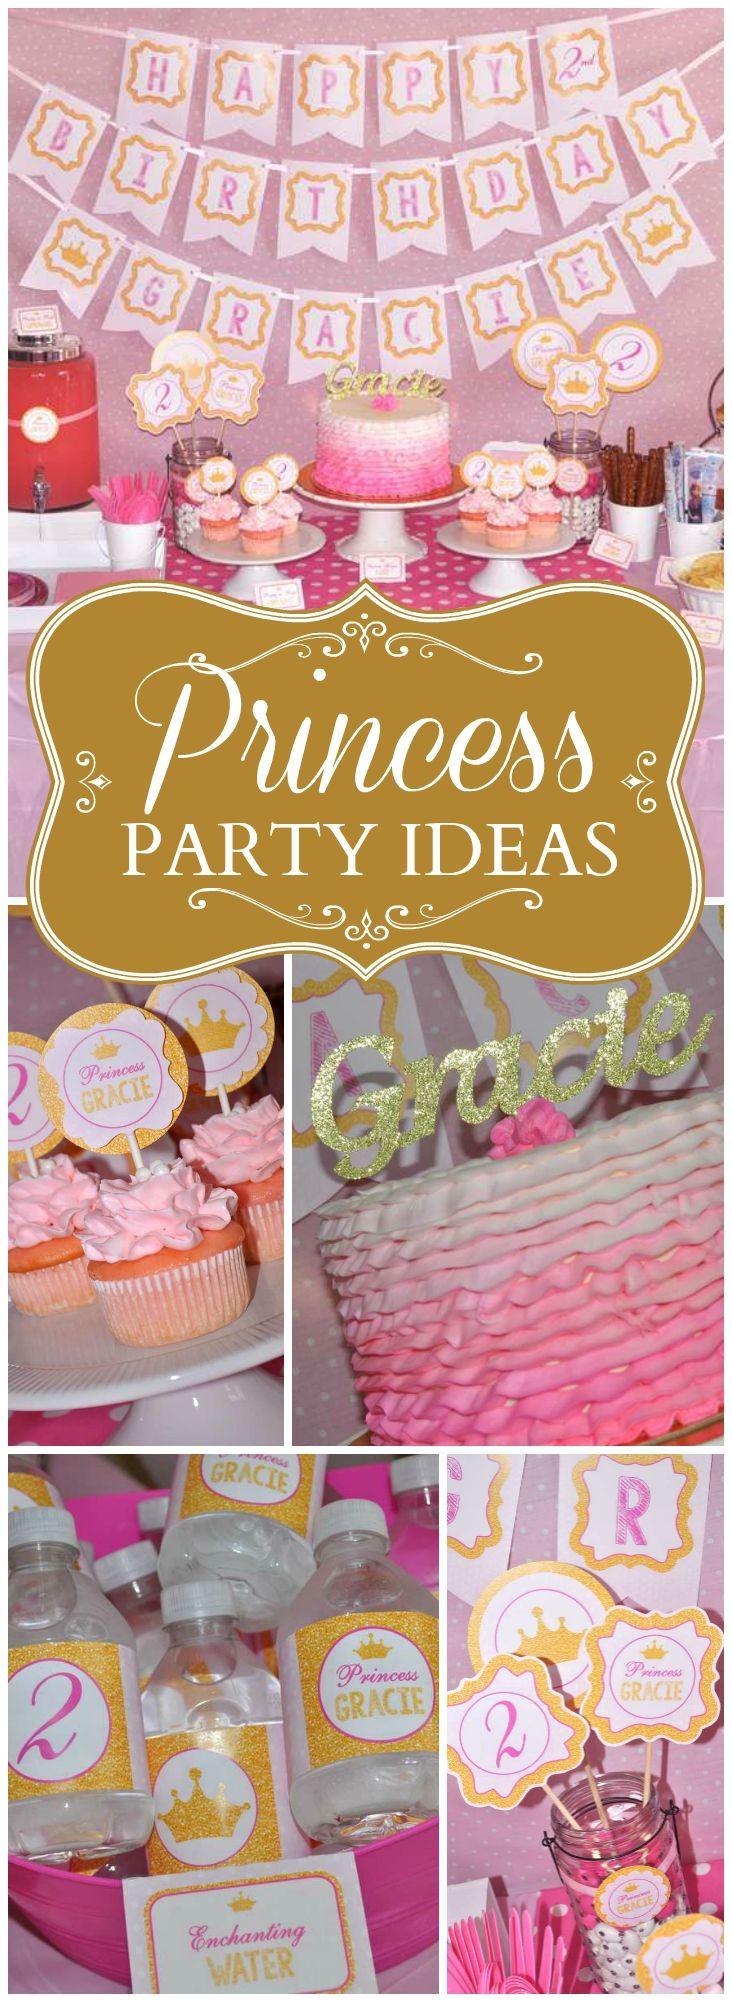 Hochzeit - PRINTABLES - DIY / Birthday "Princess Dress Up Party - Pink And Gold"